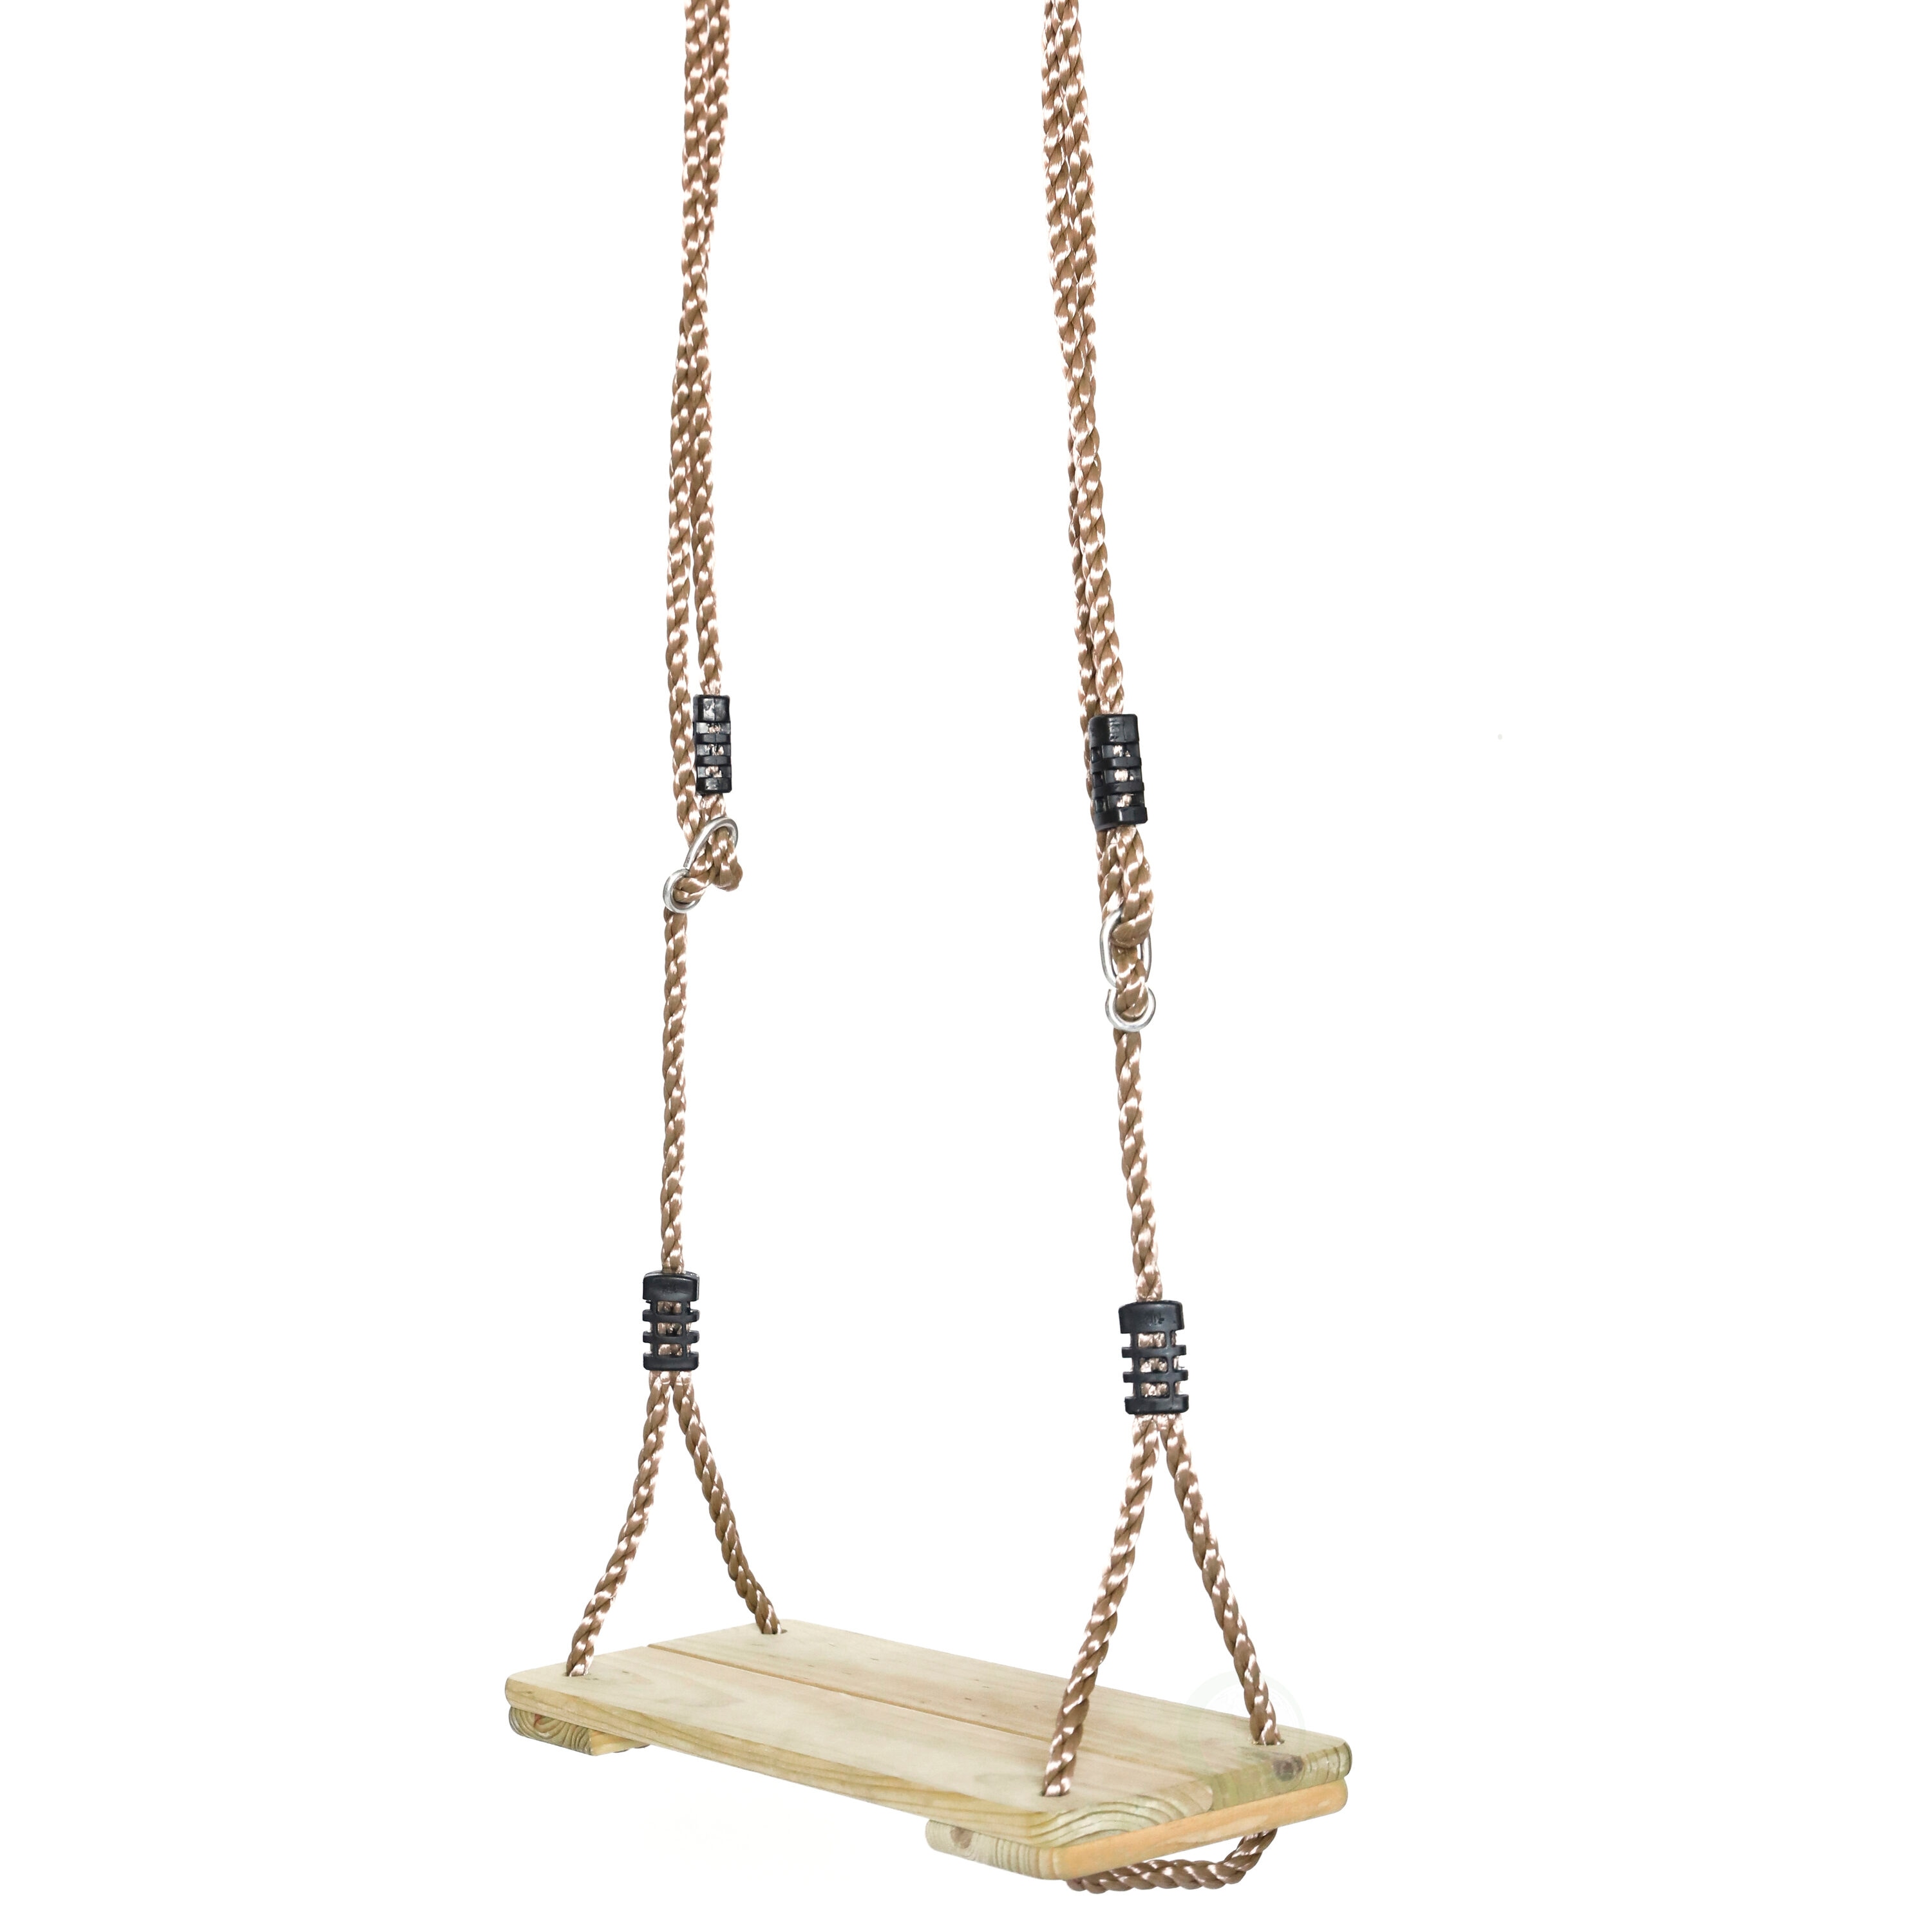 PLAYBERG Outdoor Wooden Tree Swing with Hanging Ropes